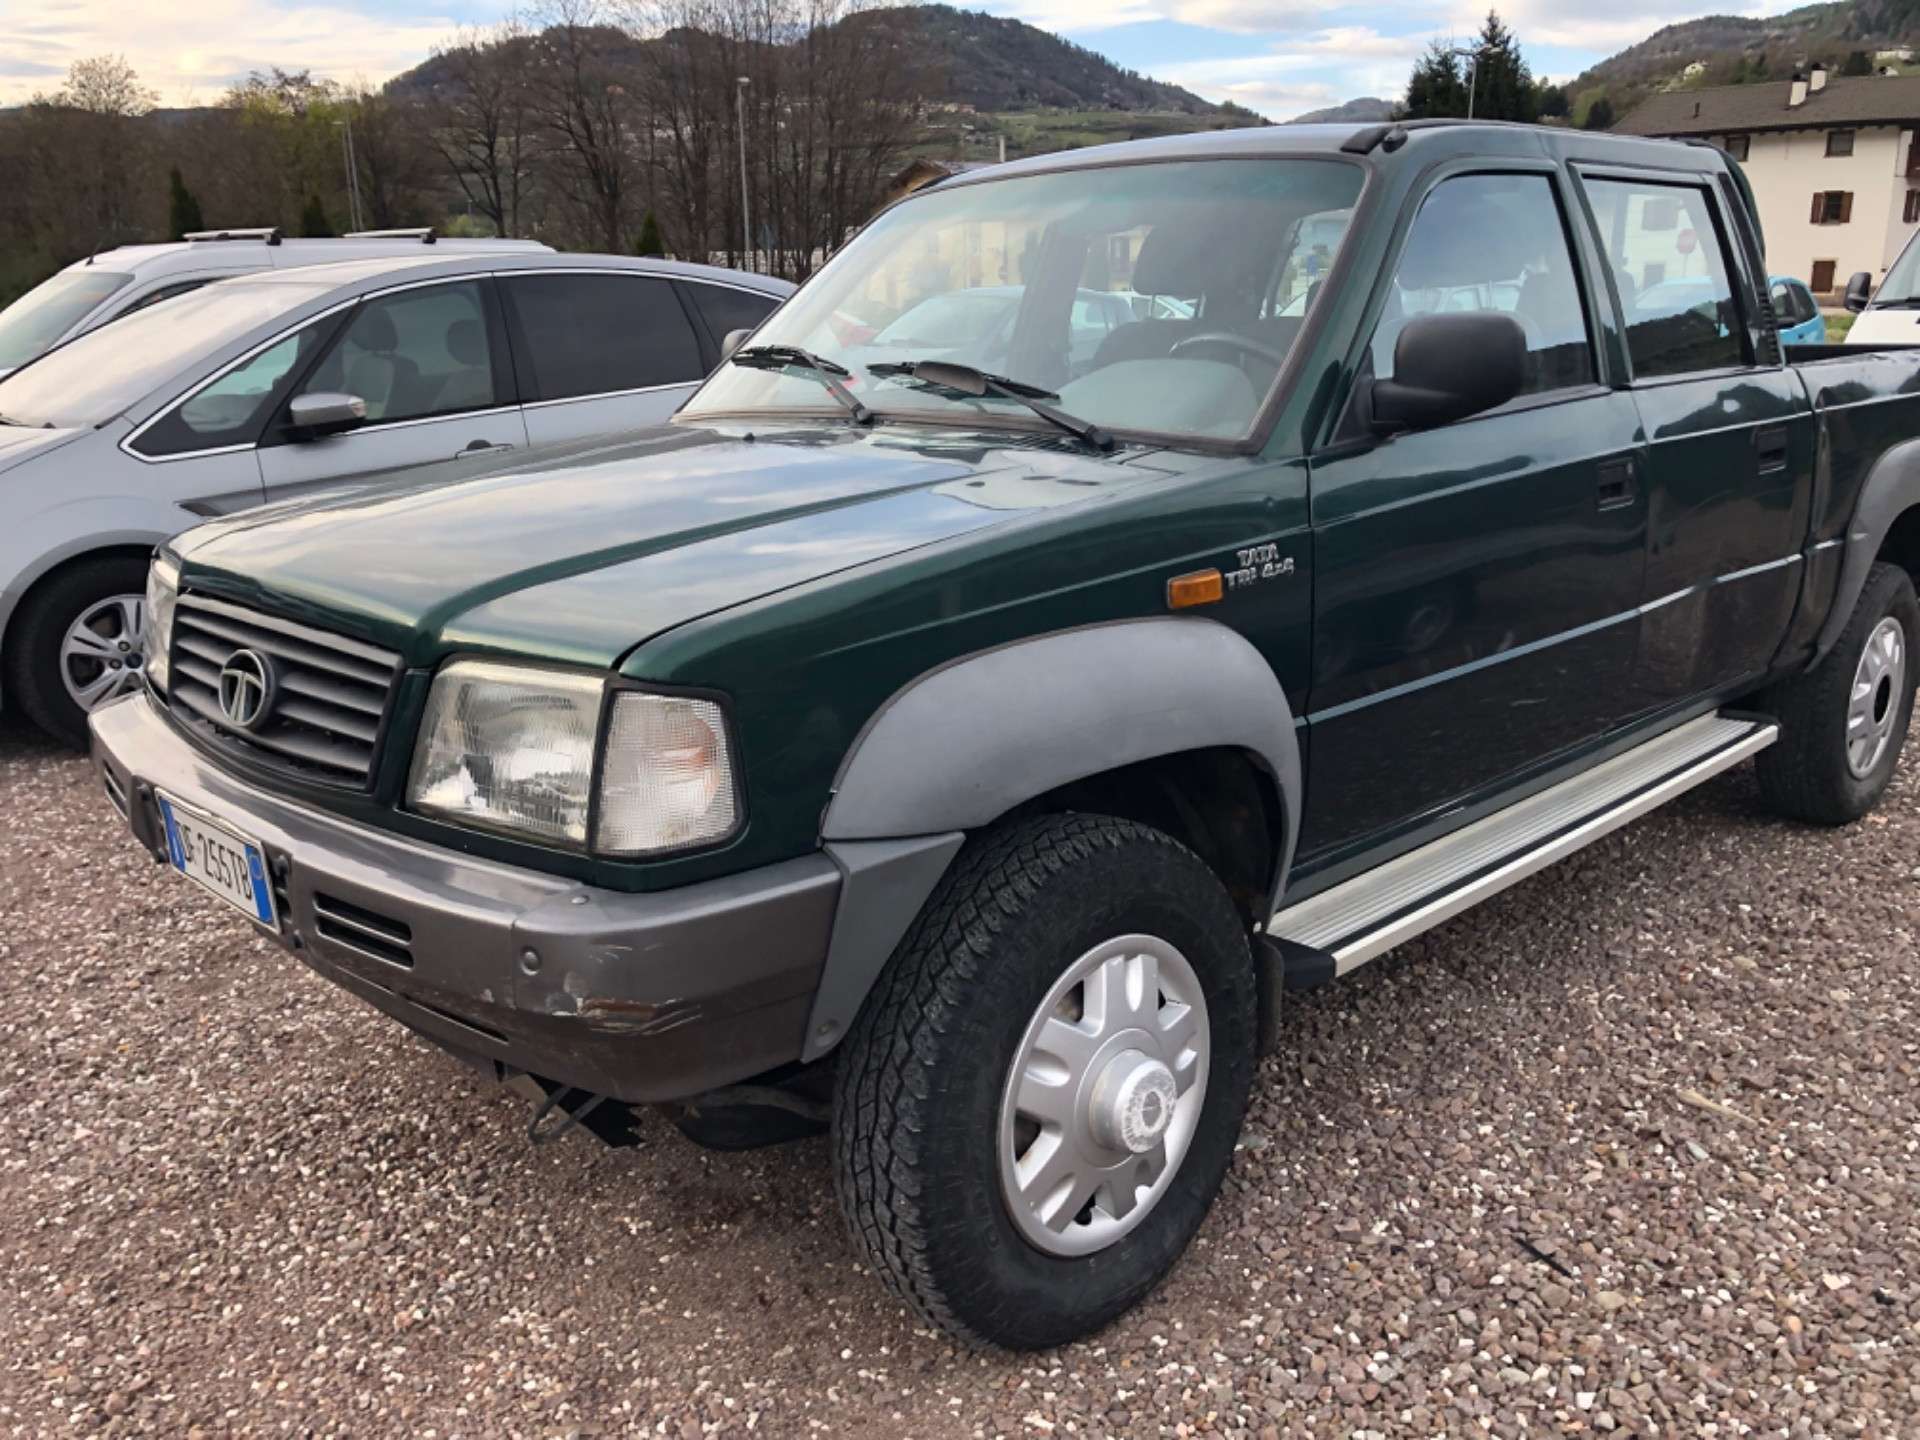 Tata Pick-Up Off-Road/Pick-up in Green used in Pergine Valsugana - Trento - Tn for € 4,800.-